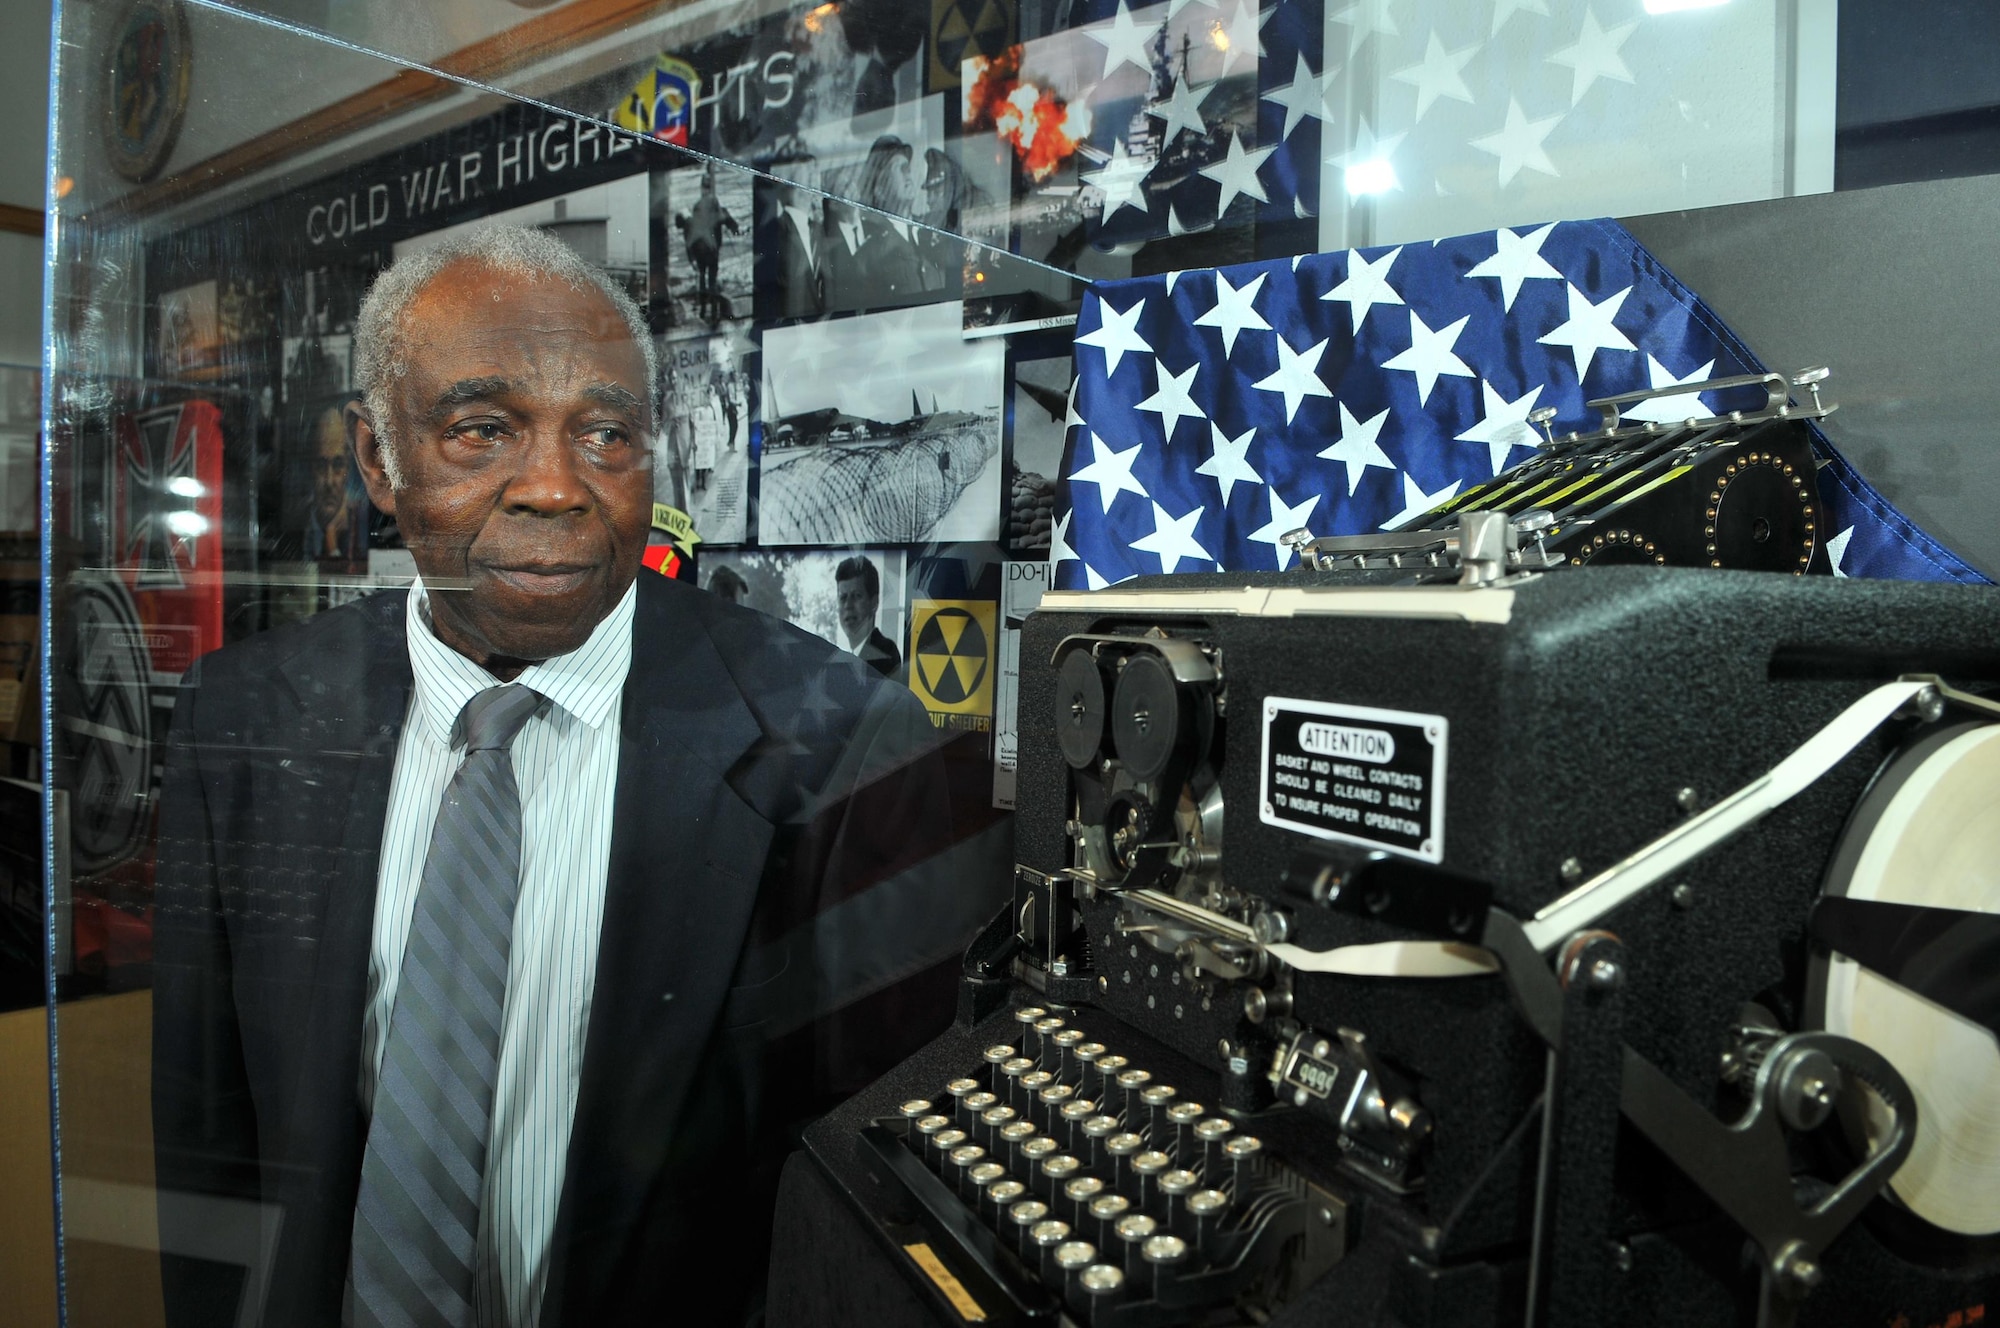 CMSgt (ret) Edward Jolly, Jr, peers through the plexiglass case at a WWII vintage SIGABA decoding machine in the AF ISR Agency Heritage Museum.  Jolly used a machine like this during his early years as cryptographic operator for the USAF Seurity Service in the 1950s.